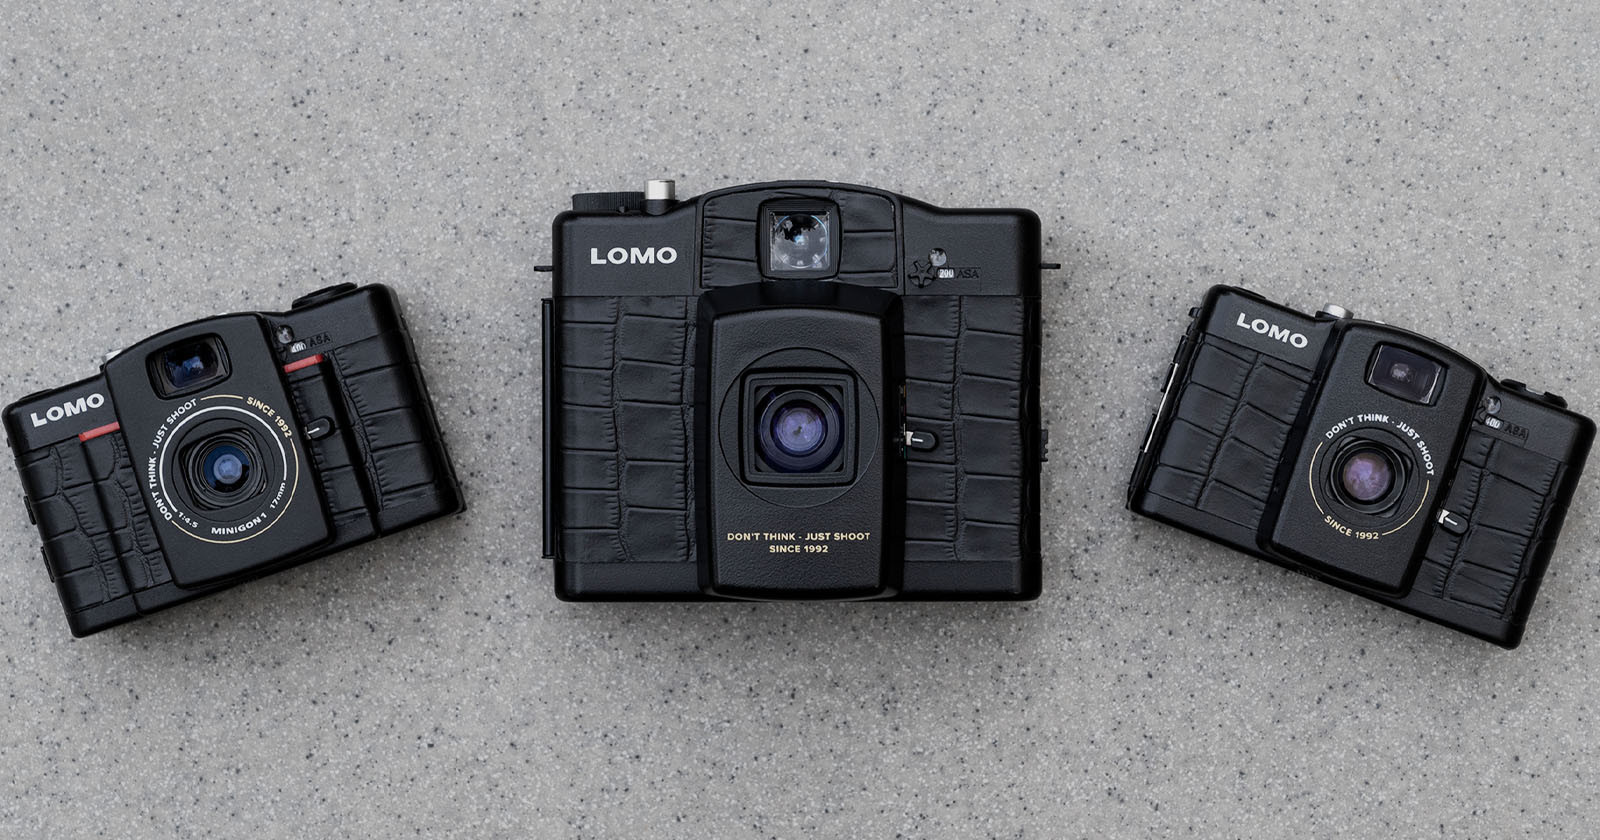 Lomography Leather Wraps Three LC-A Film Cameras for a Limited Run